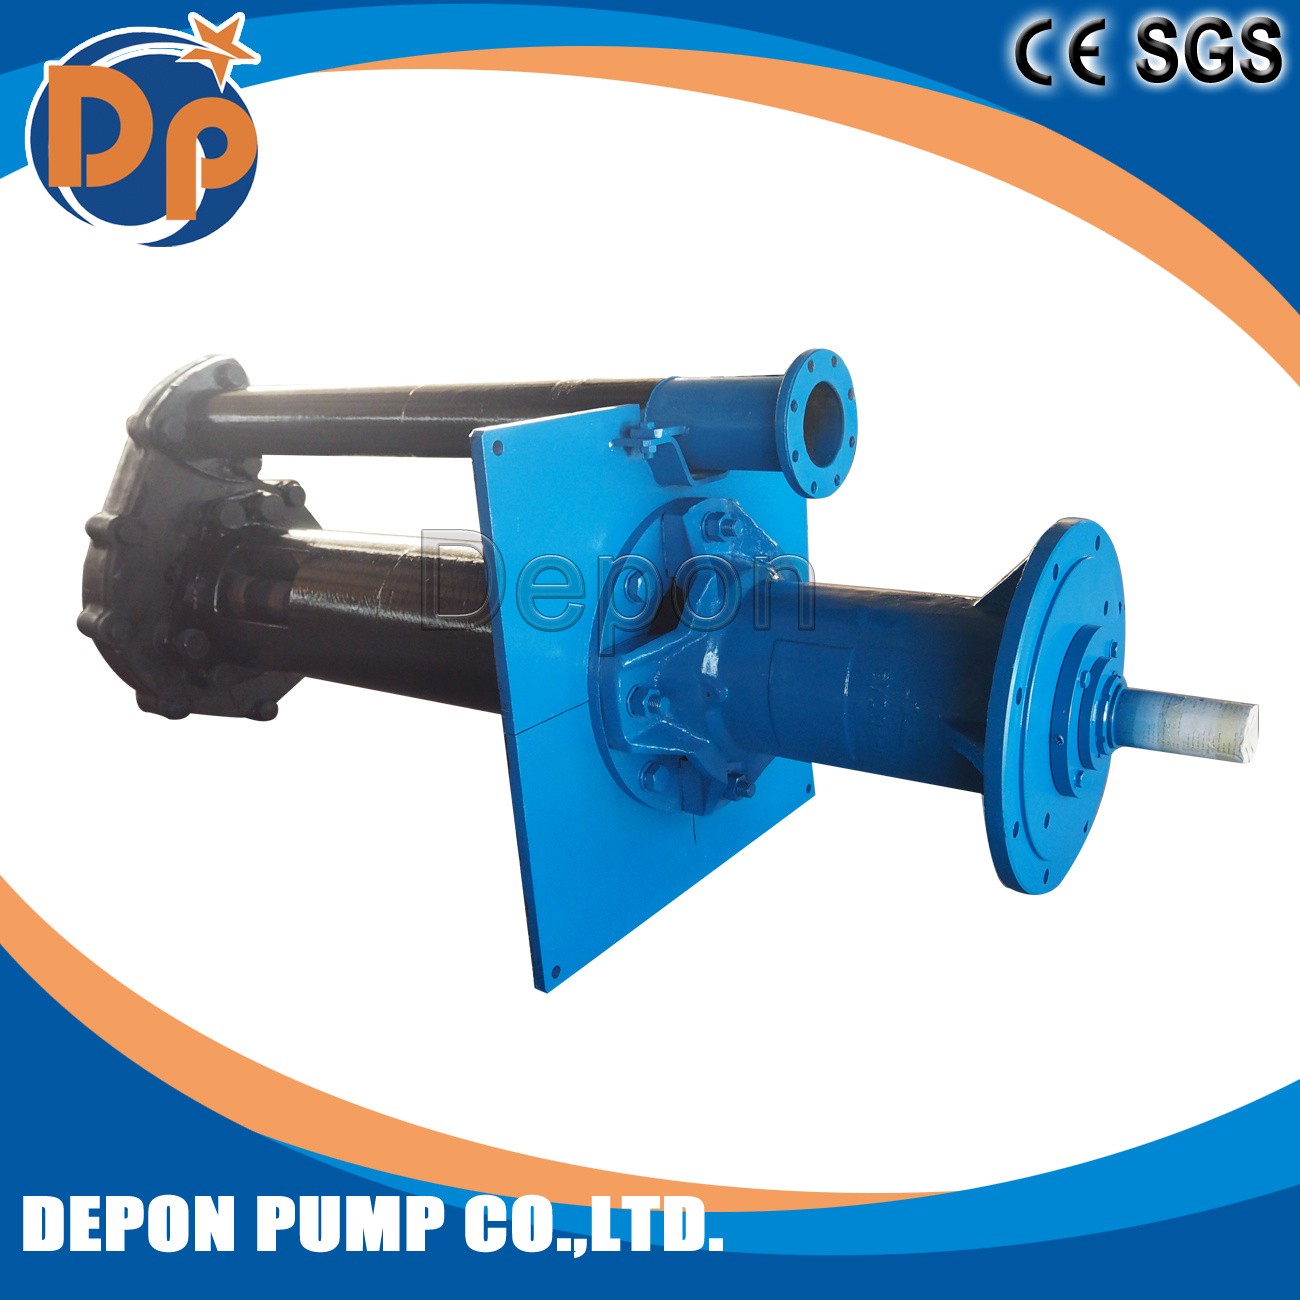 Centrifugal Pump Theory and Electric Power Vertical Slurry Pump